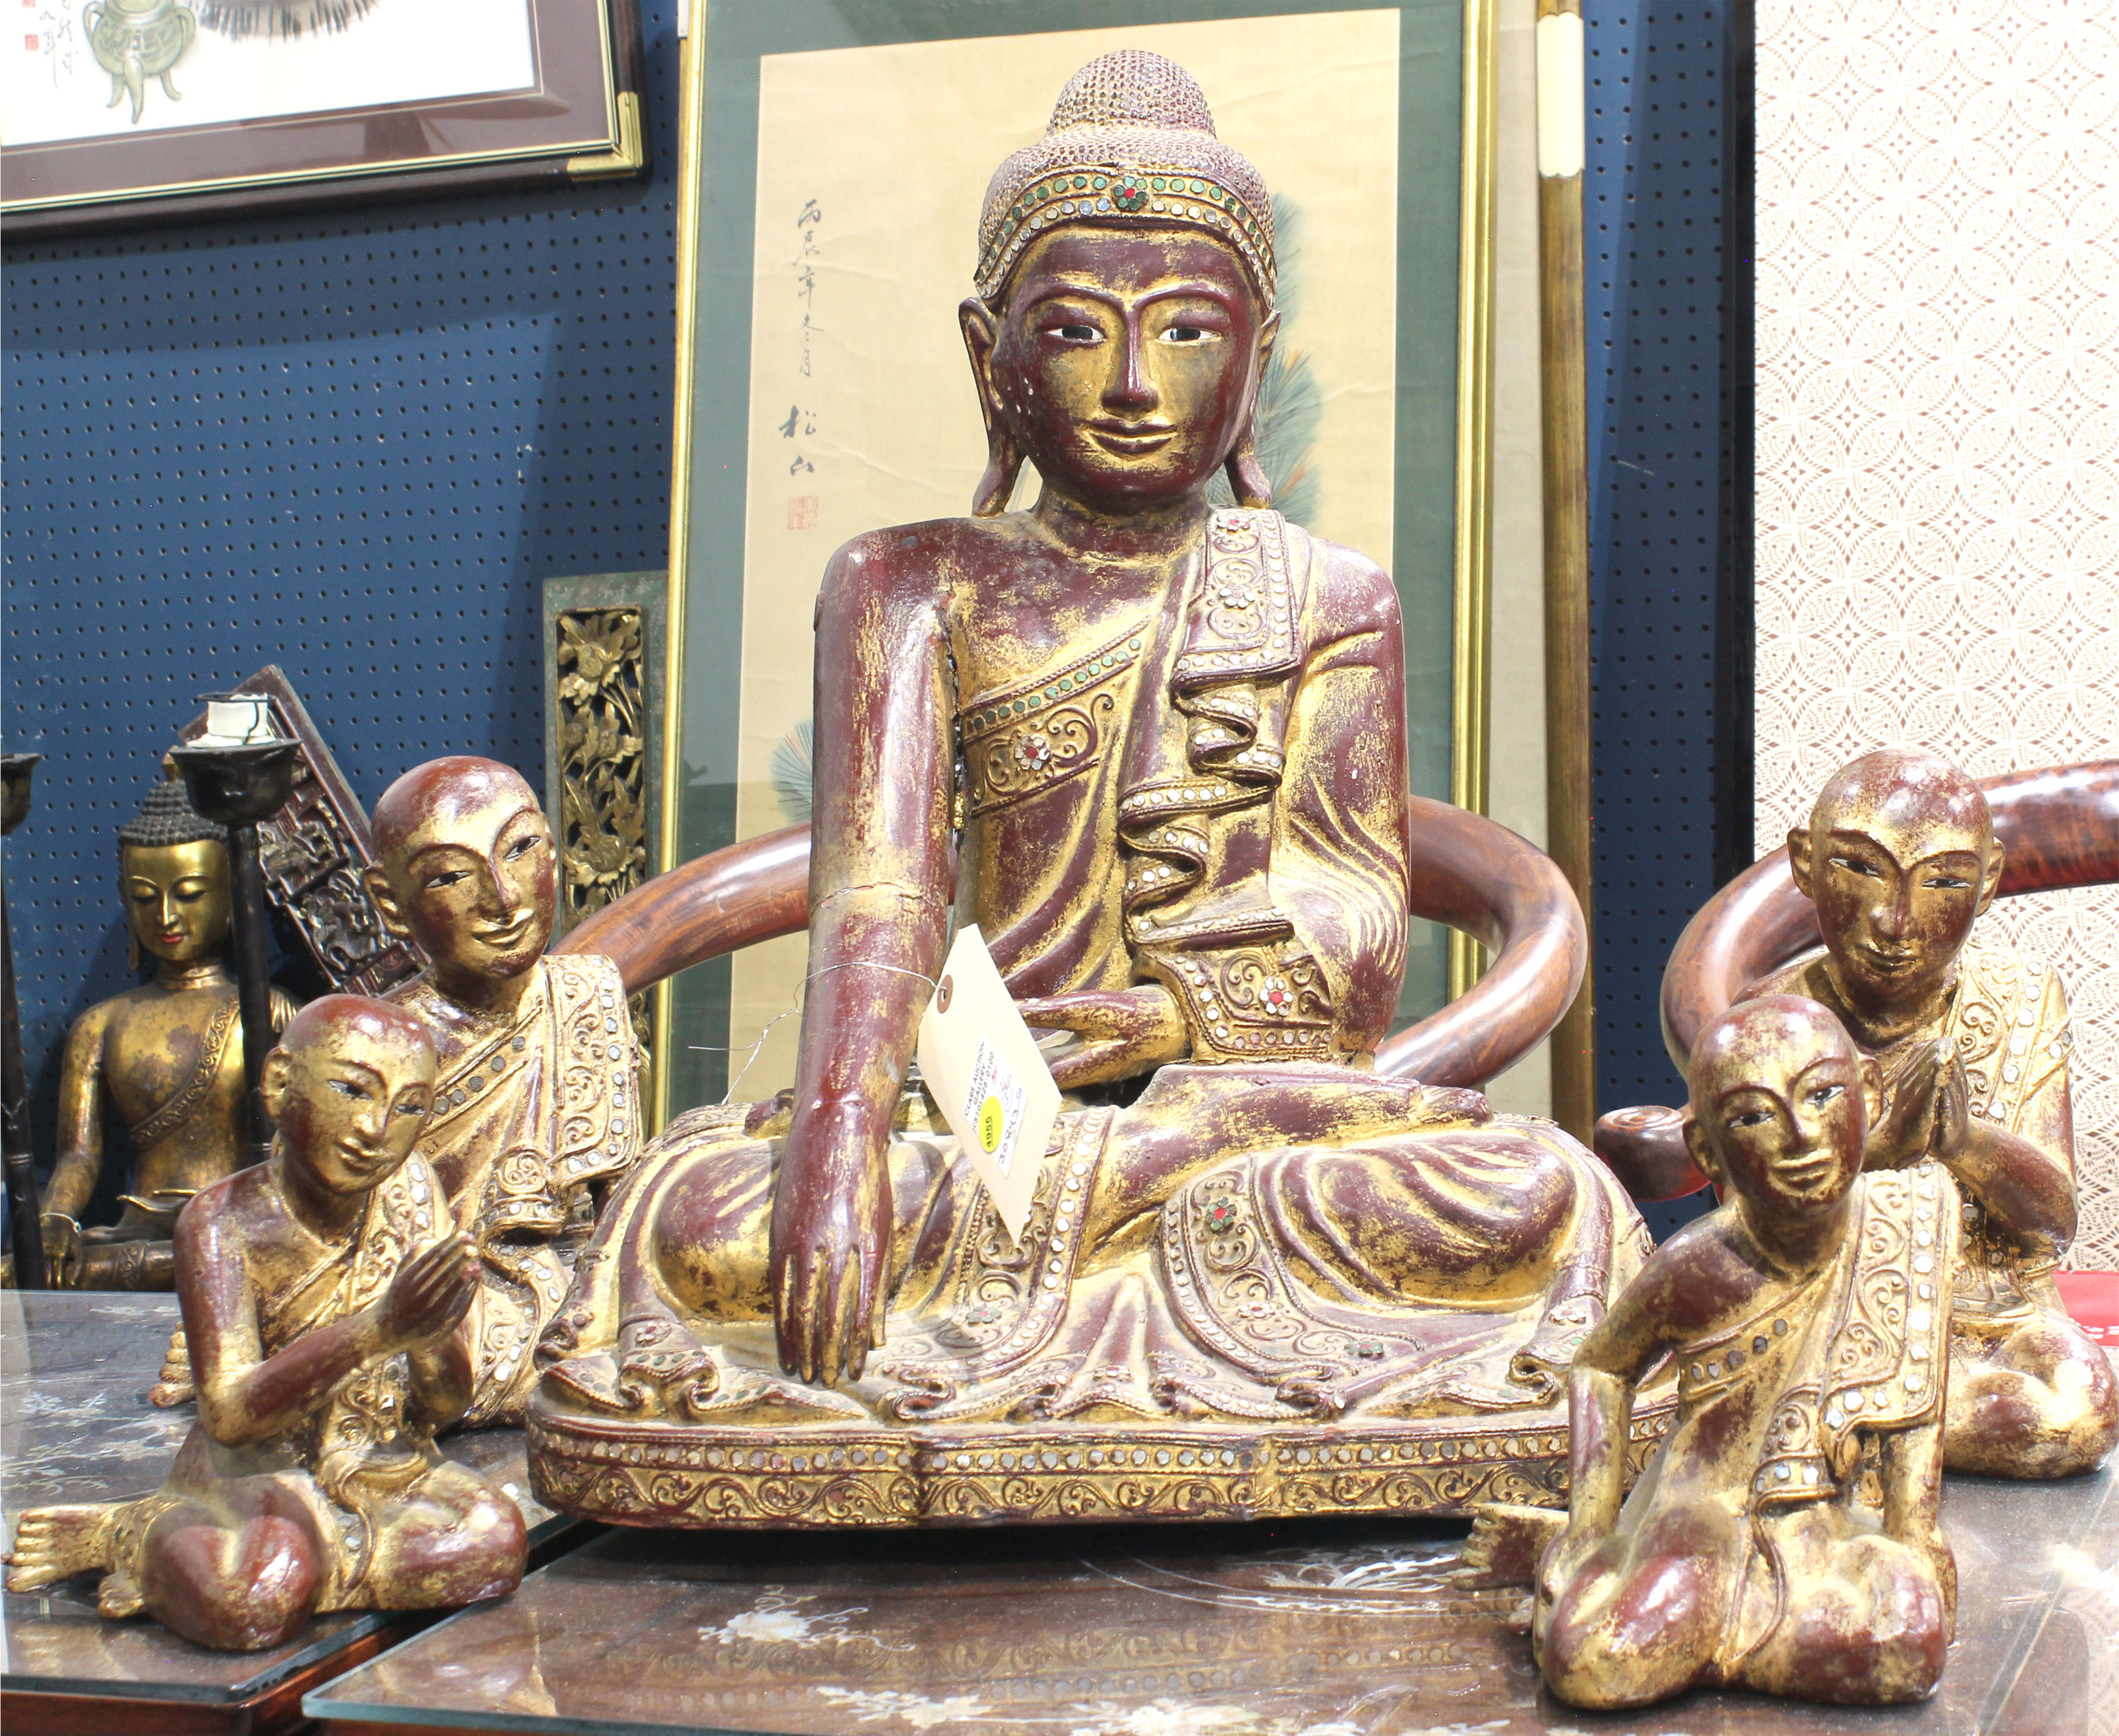 (lot of 5) Thai mirrored inlaid gilt over lacquer seated figure of Buddha - Image 2 of 6